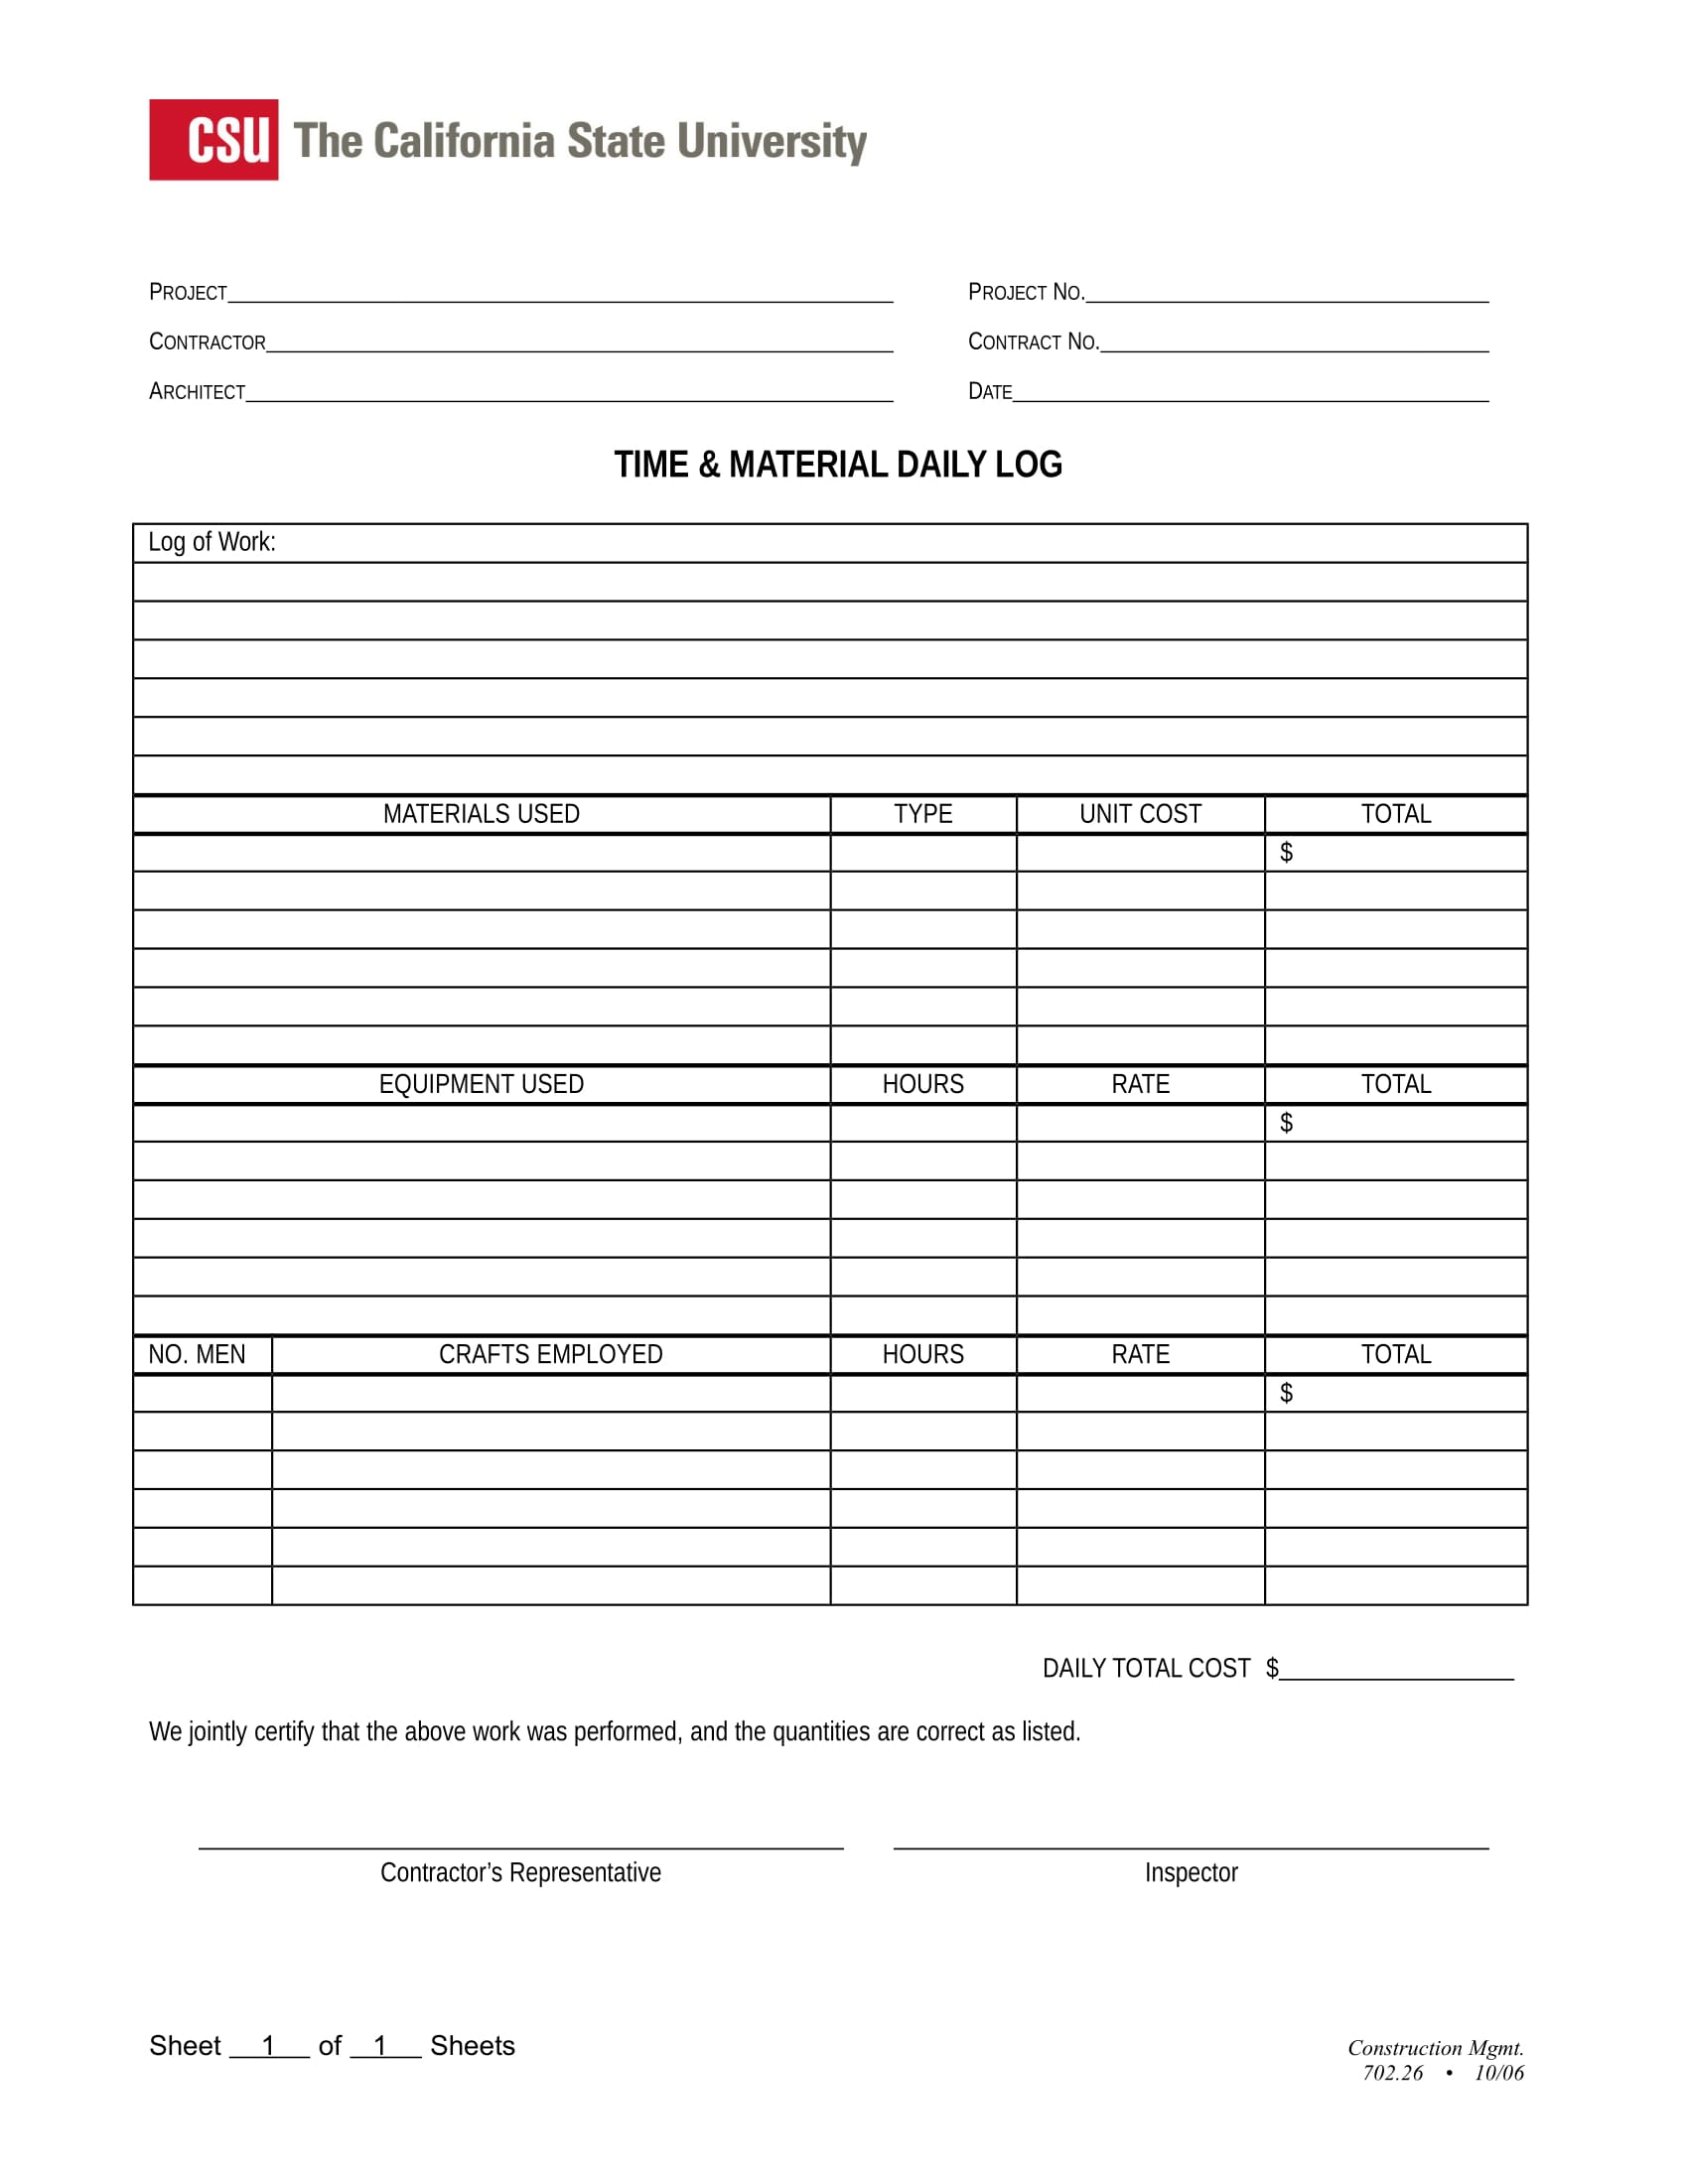 Time and Material Daily Log Example